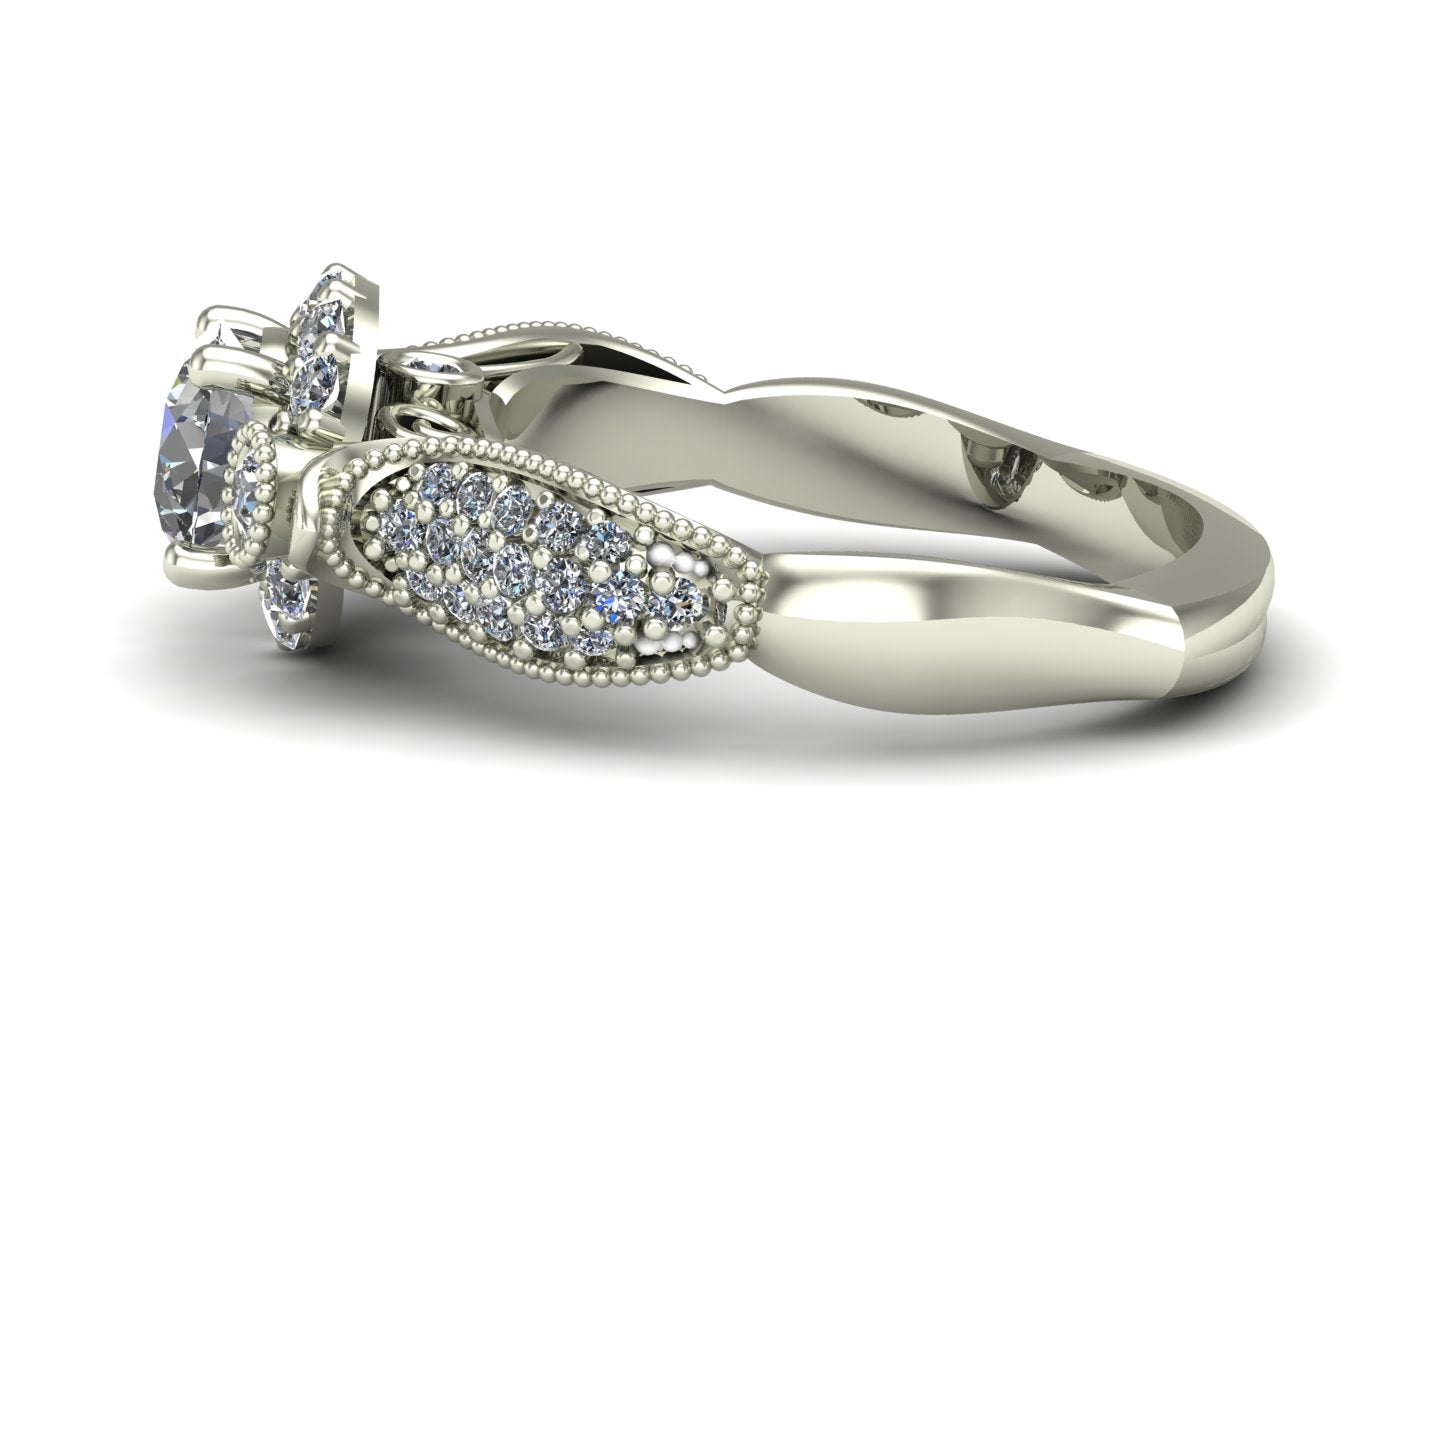 1ct diamond pavé engagement ring in 18k white gold - Charles Babb Designs - side view